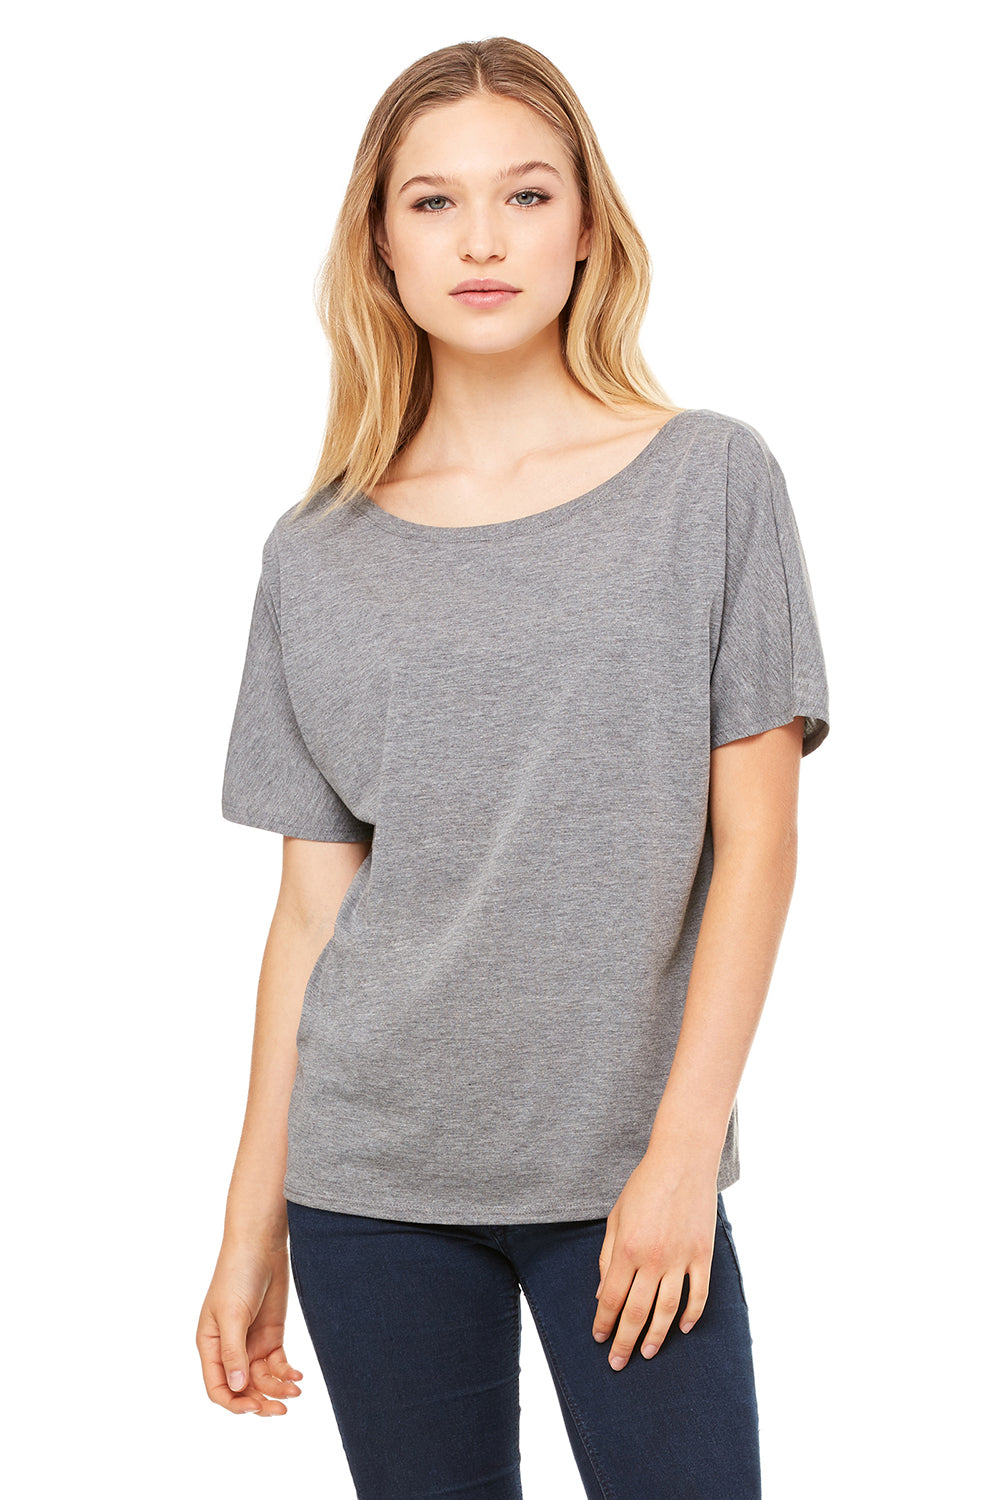 Bella + Canvas 8816 Womens Slouchy Short Sleeve Wide Neck T-Shirt Grey Triblend Front